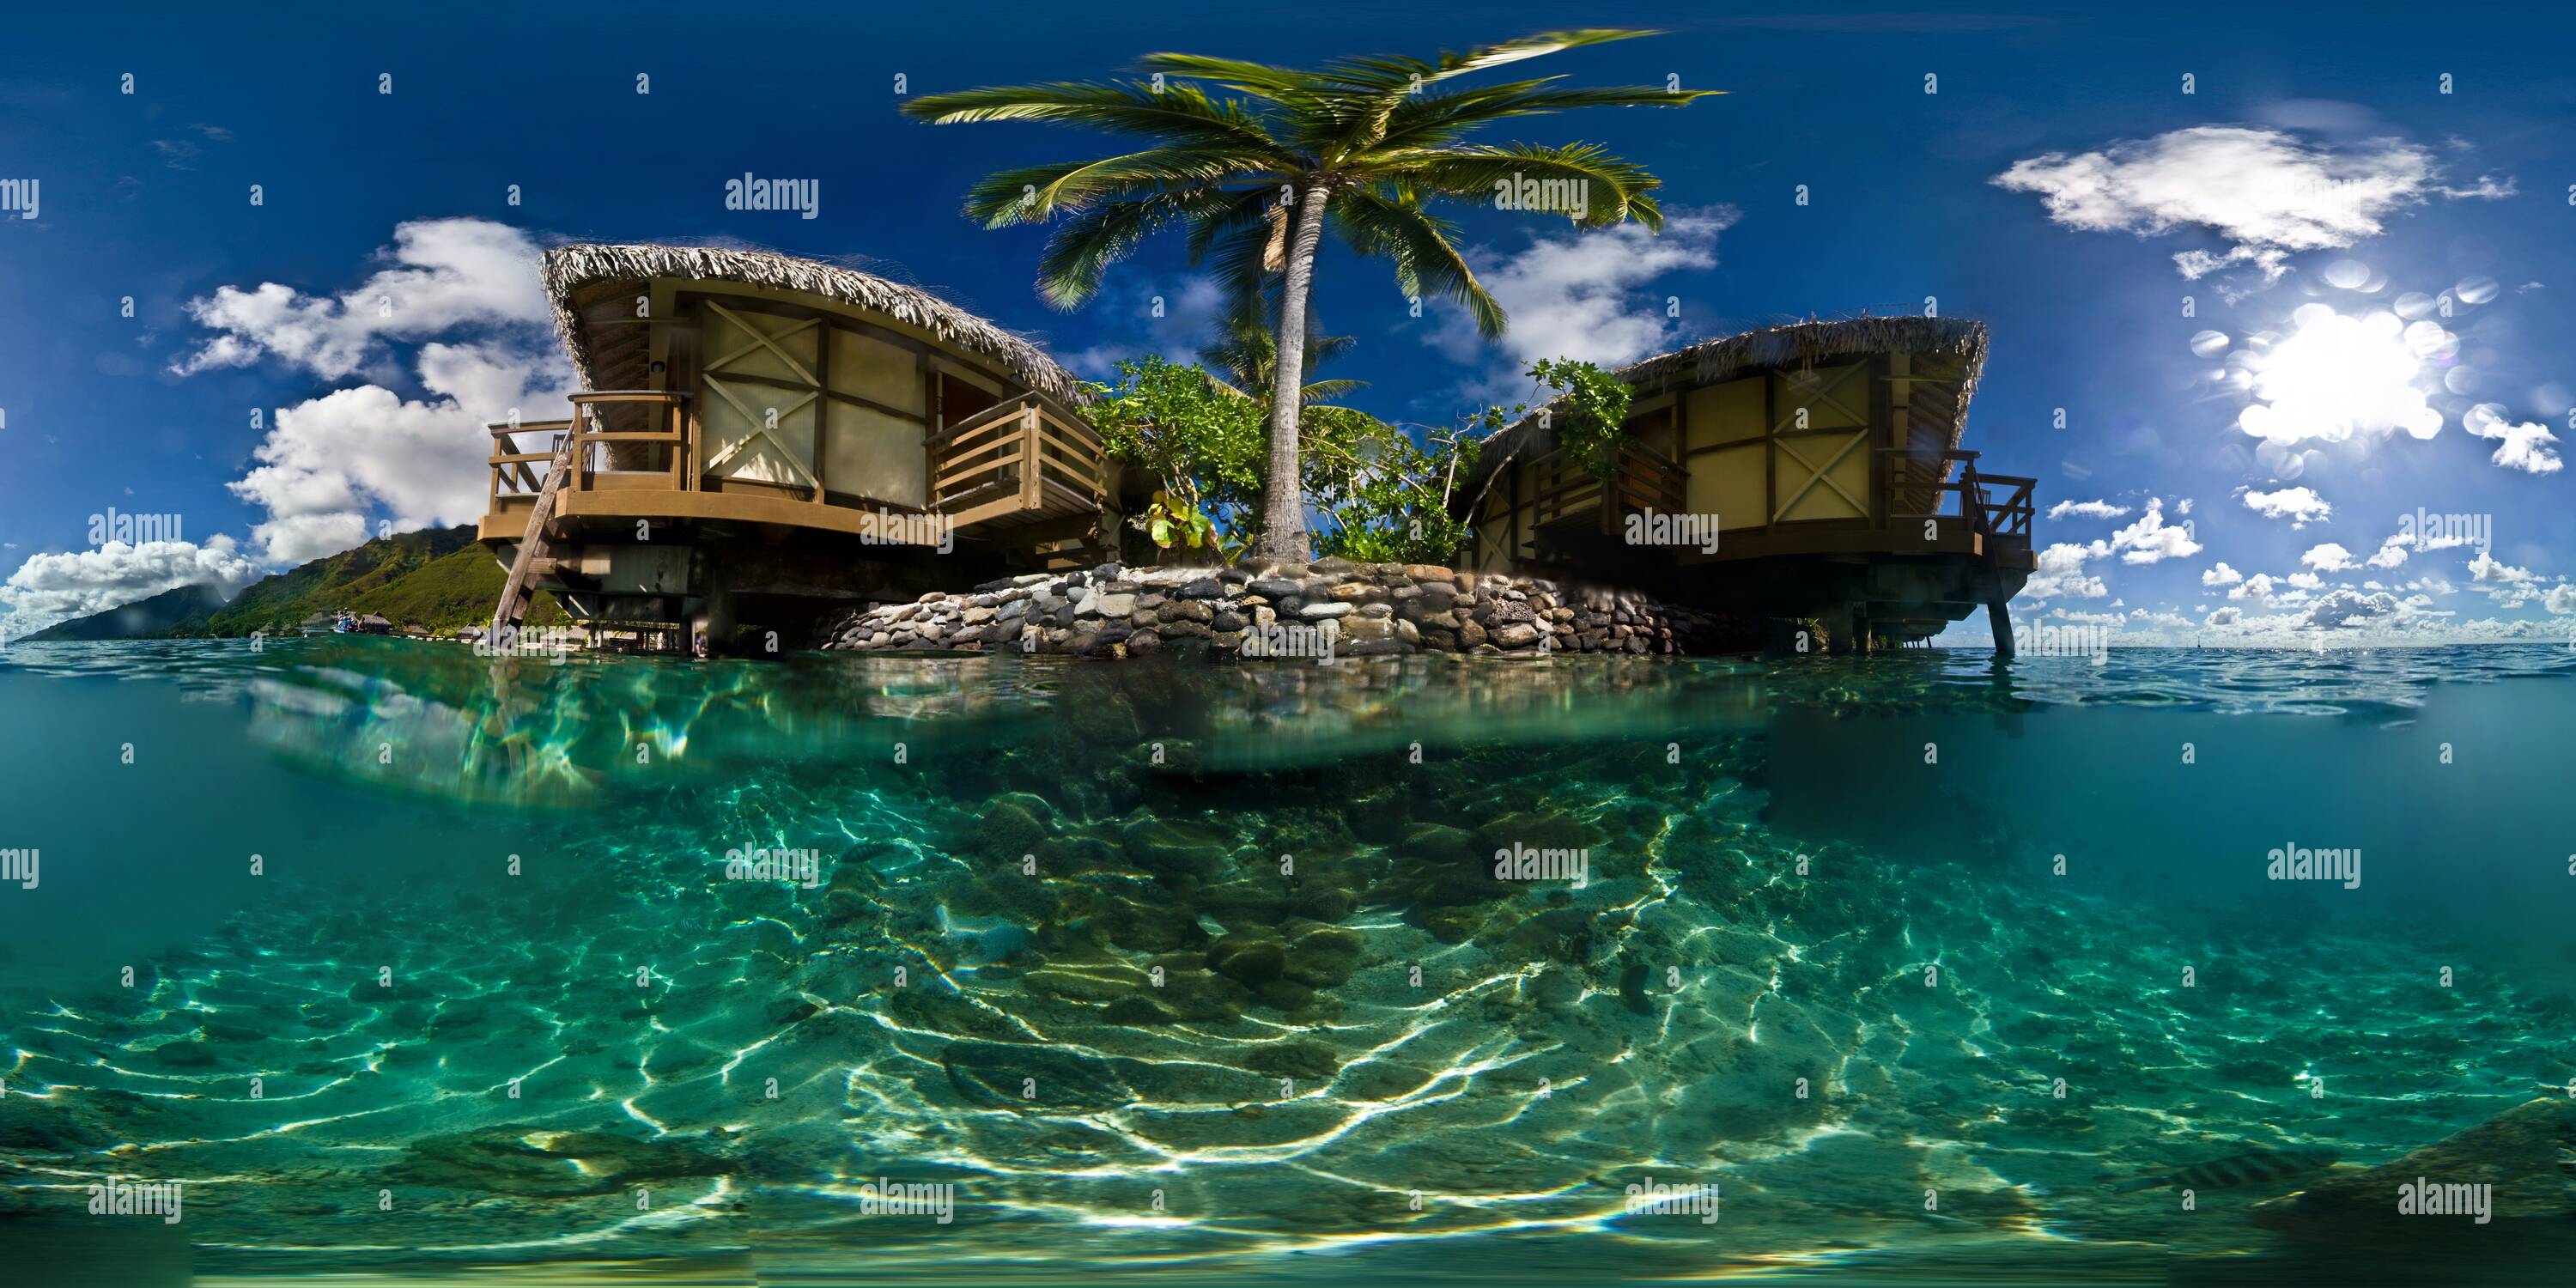 360 degree panoramic view of Halfway Water : Between the OverWater bungalows